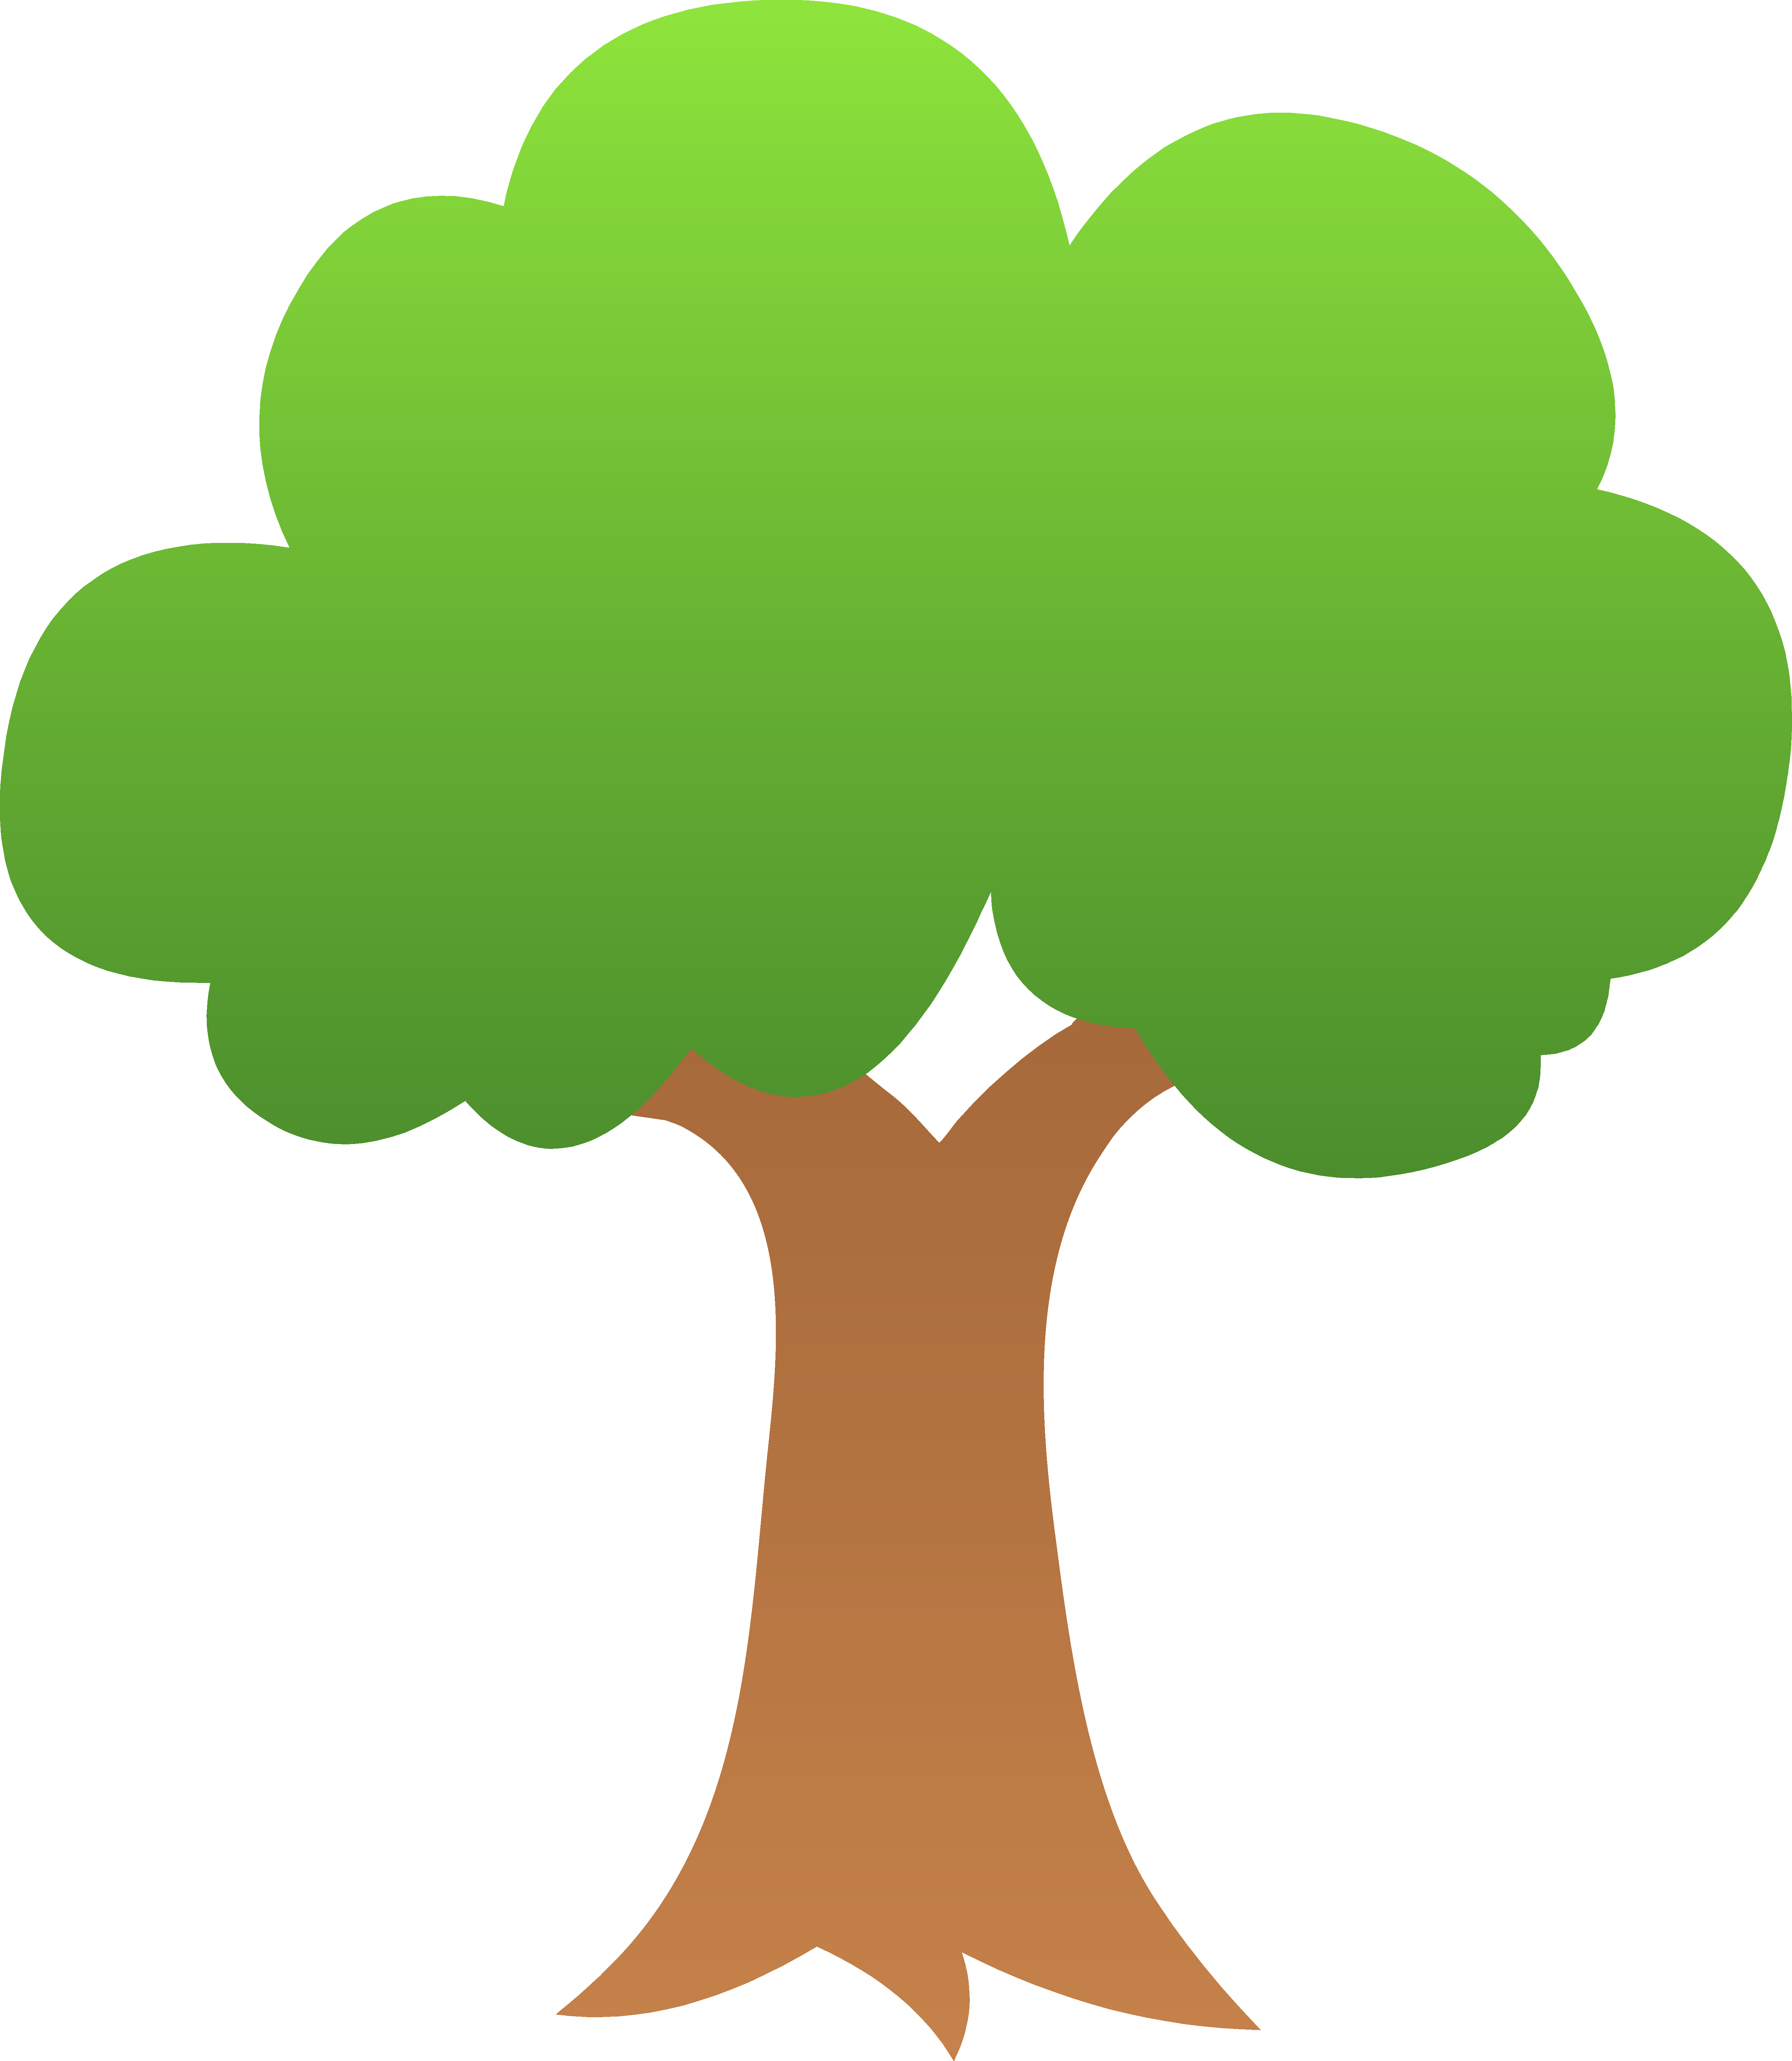 Tree Clip Art Free Downloads | Clipart Panda - Free Clipart Images